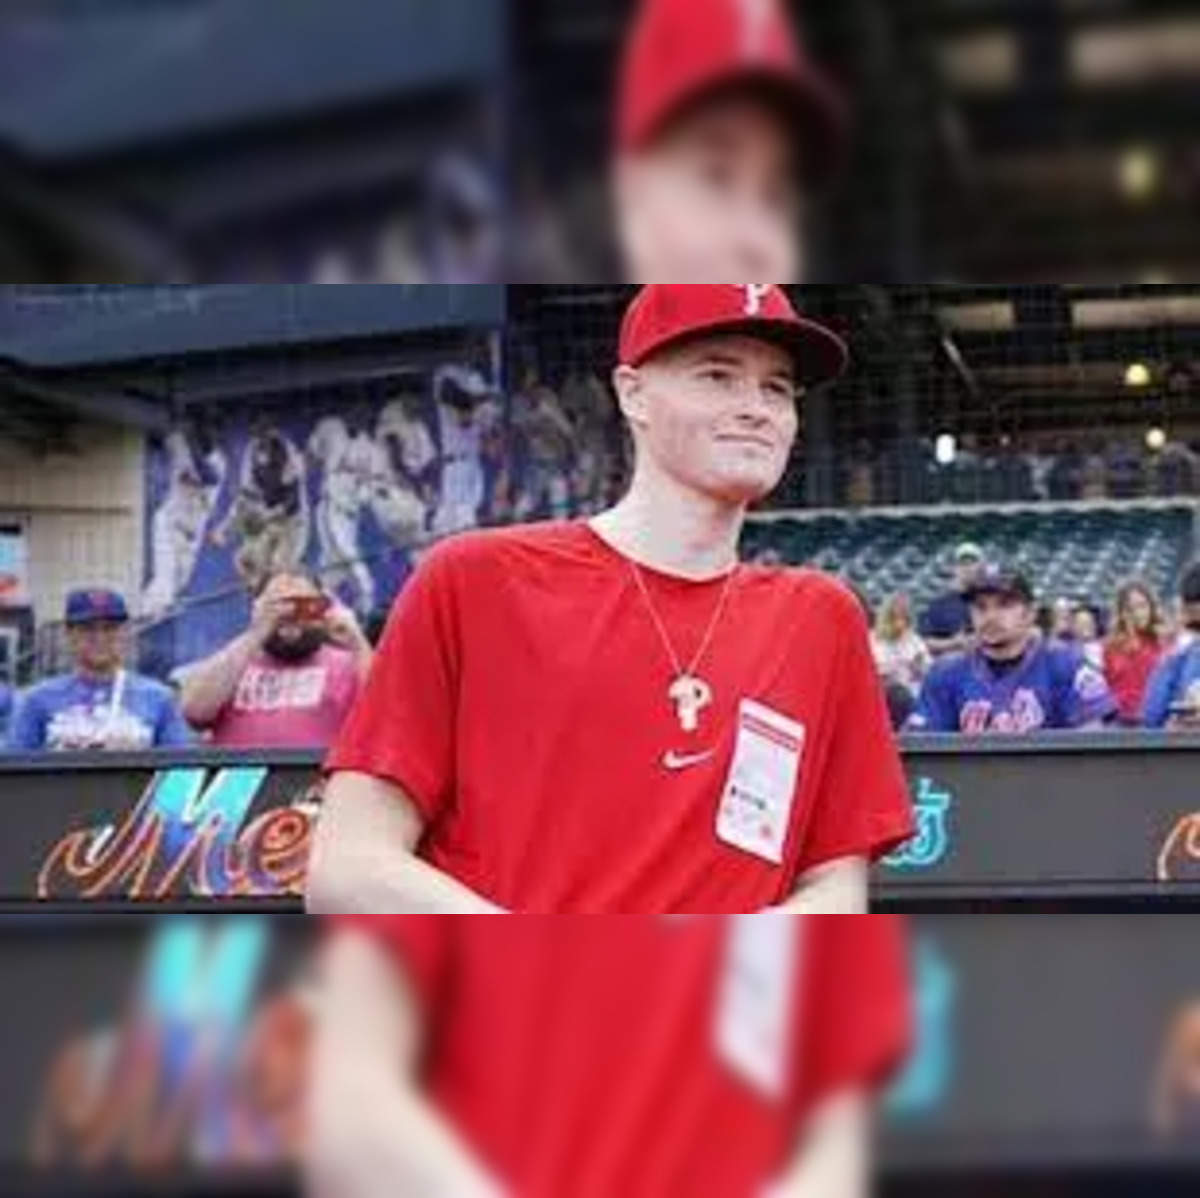 Red October: Phillies fever rising for family who named kids after